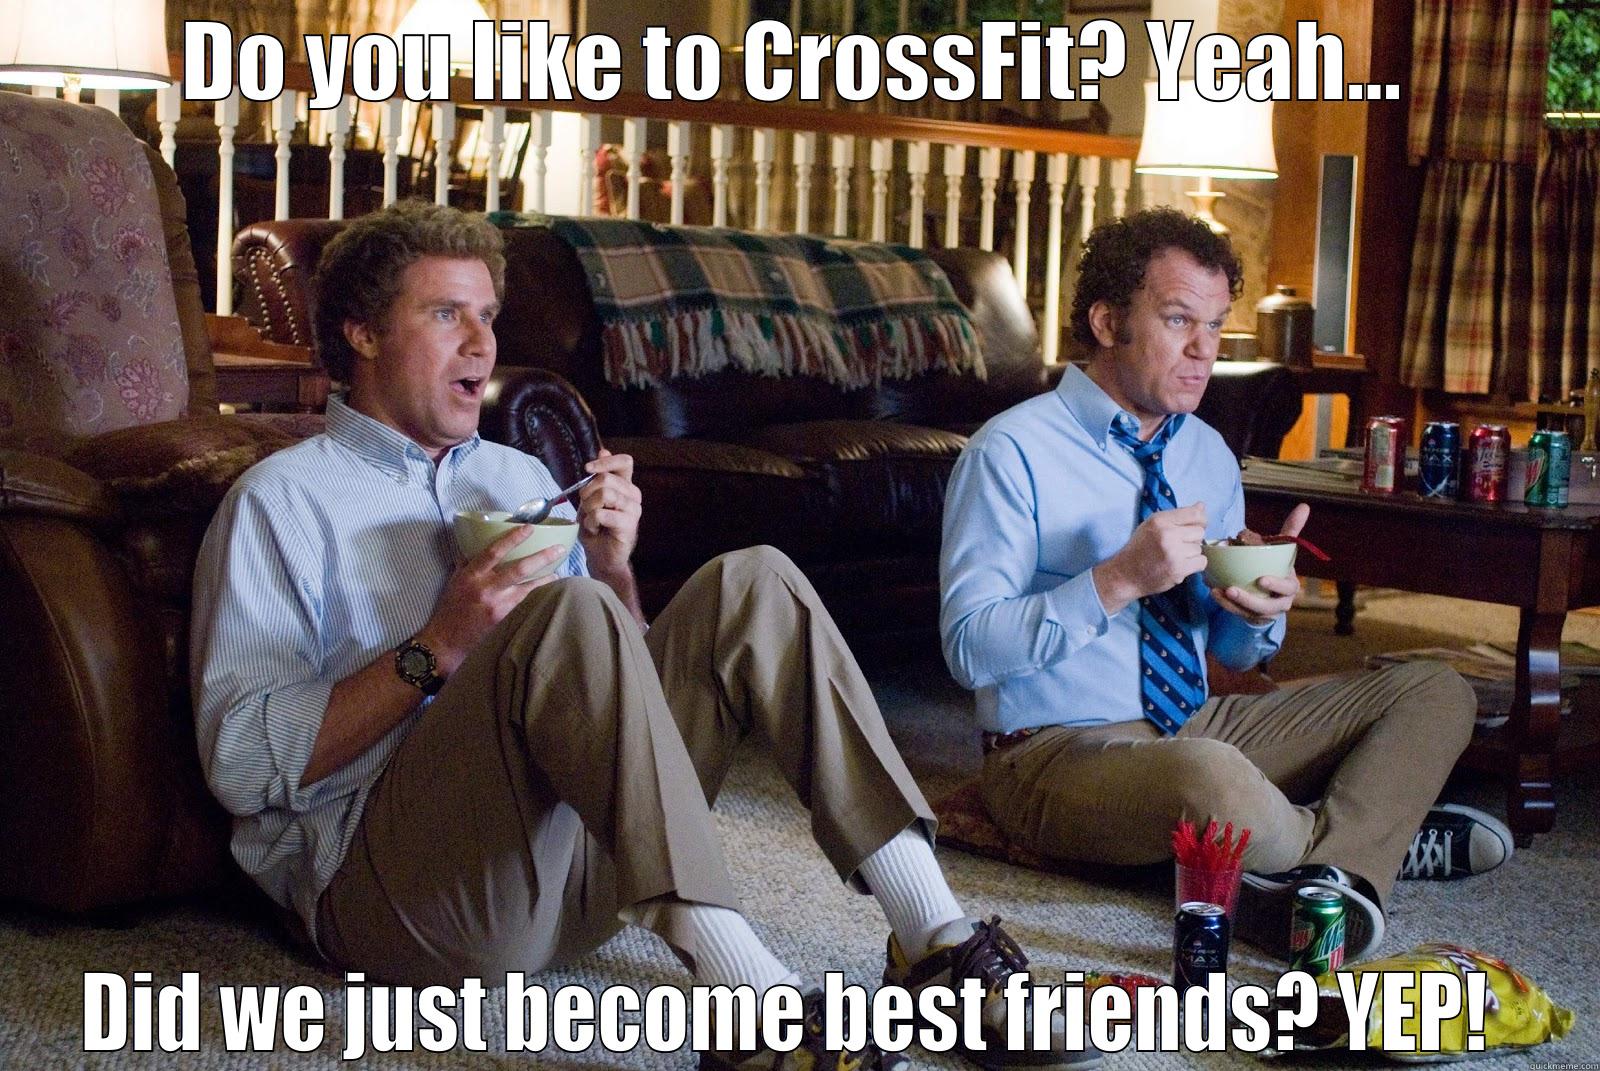 DO YOU LIKE TO CROSSFIT? YEAH... DID WE JUST BECOME BEST FRIENDS? YEP!  Misc